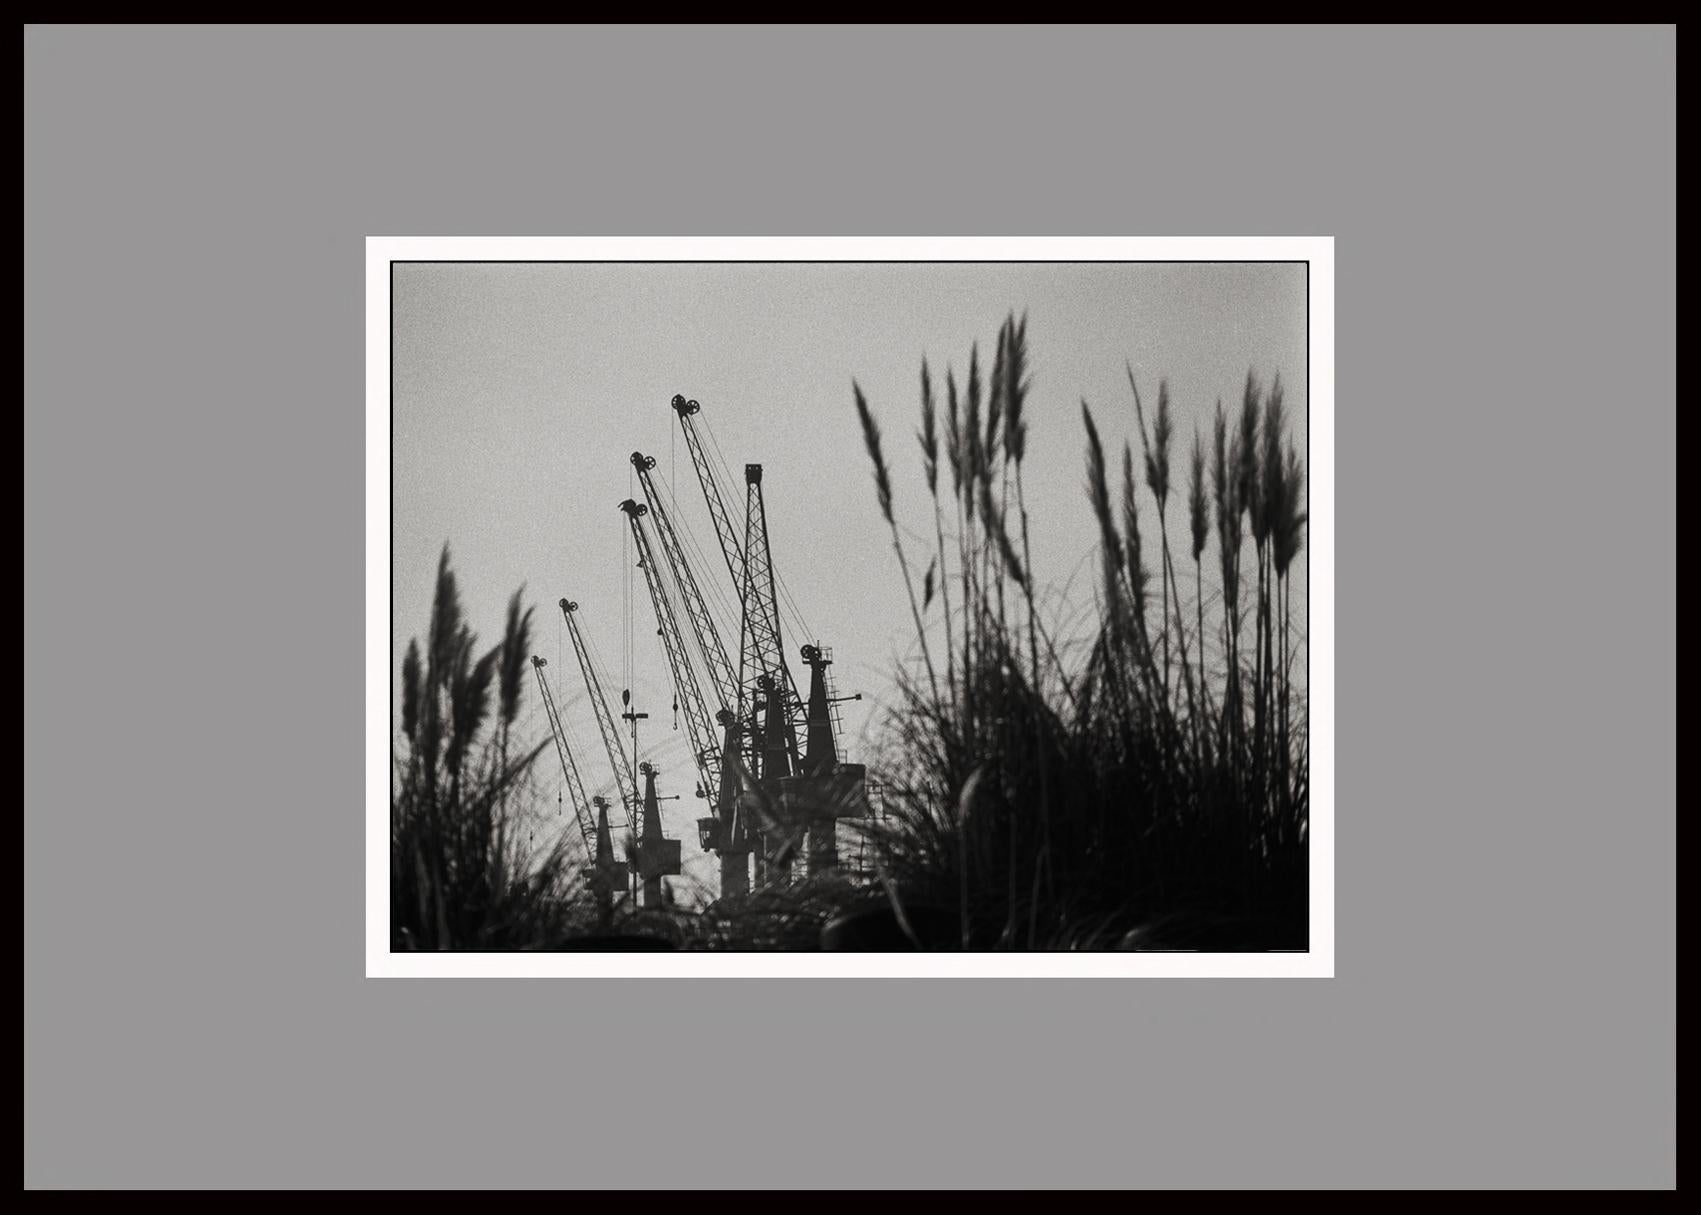 Harbor, Black & White Photography, Gelatin Silver Print, Signed, Portugal 2000 - Gray Landscape Photograph by Ana Maria Cortesão